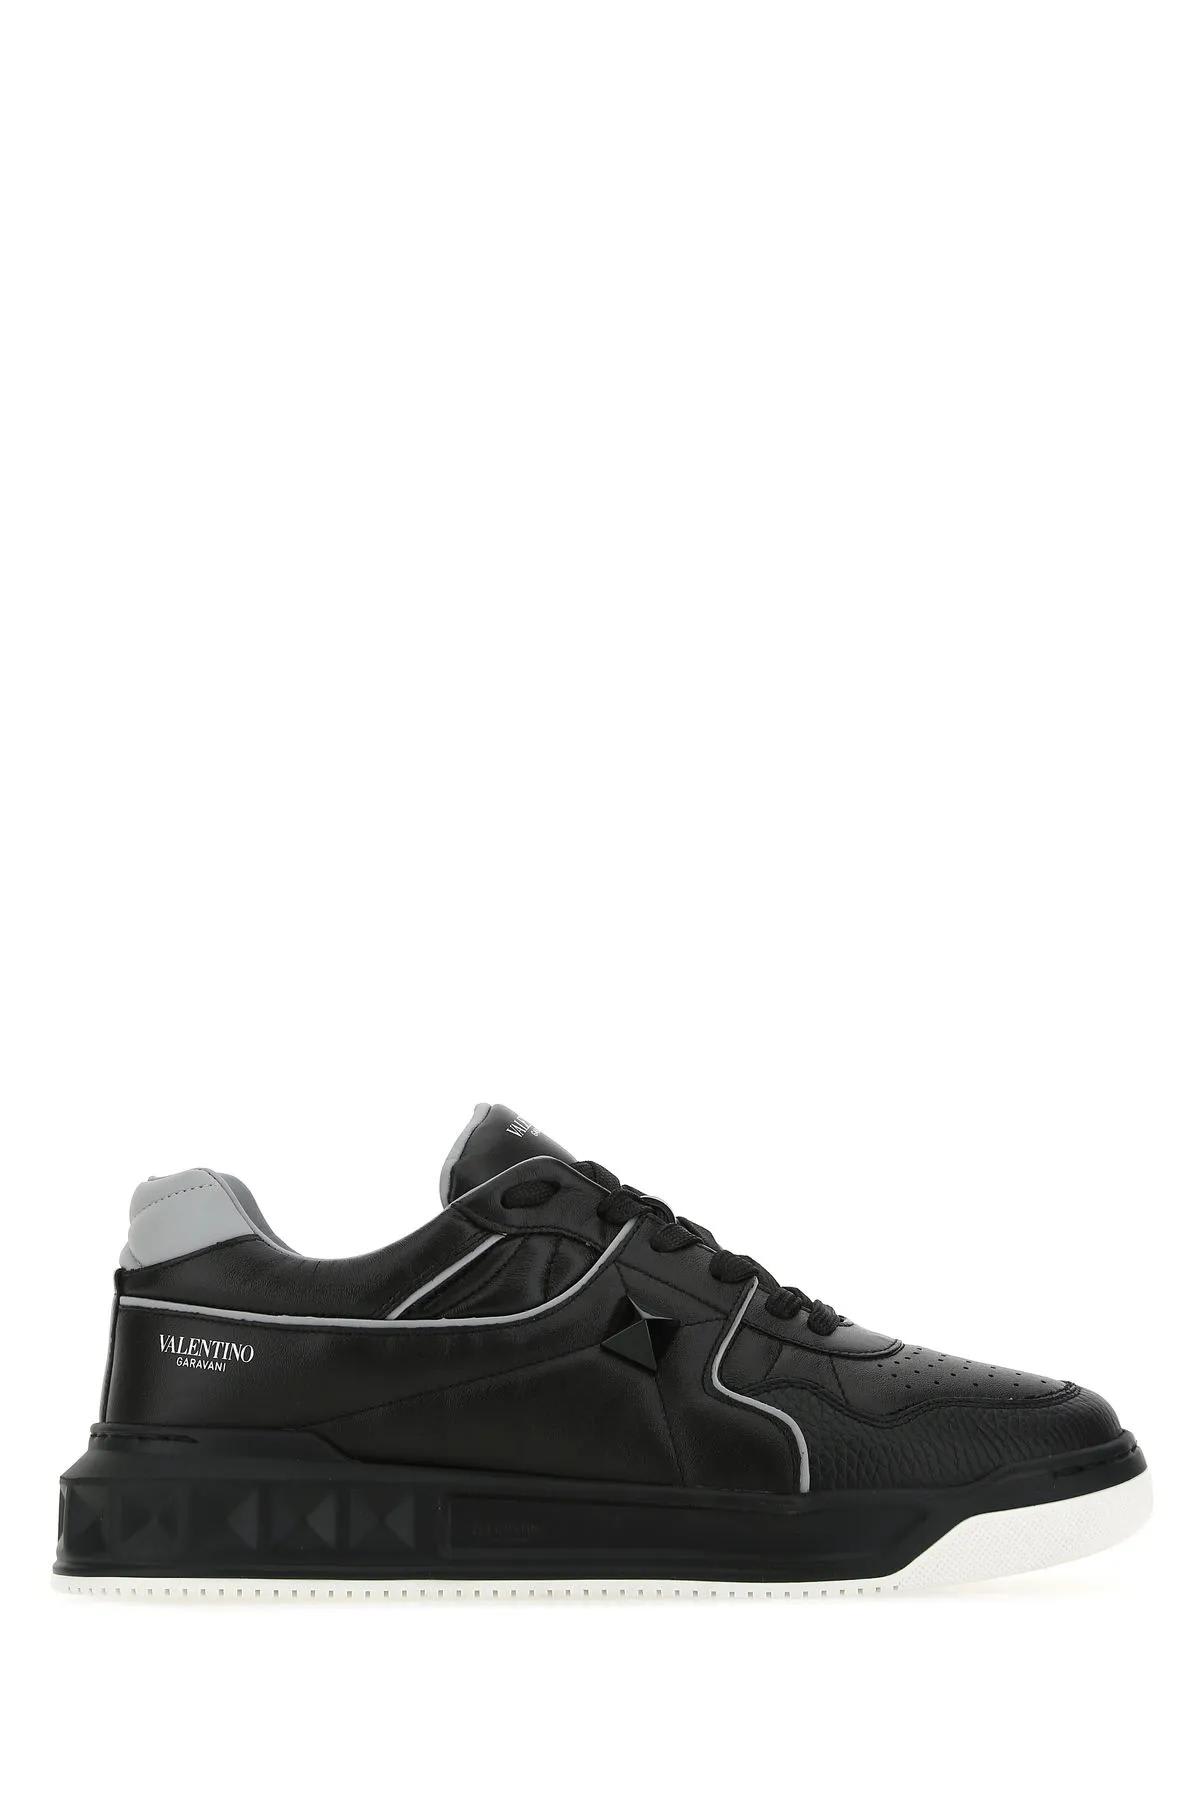 Shop Valentino Black Nappa Leather One Stud Sneakers